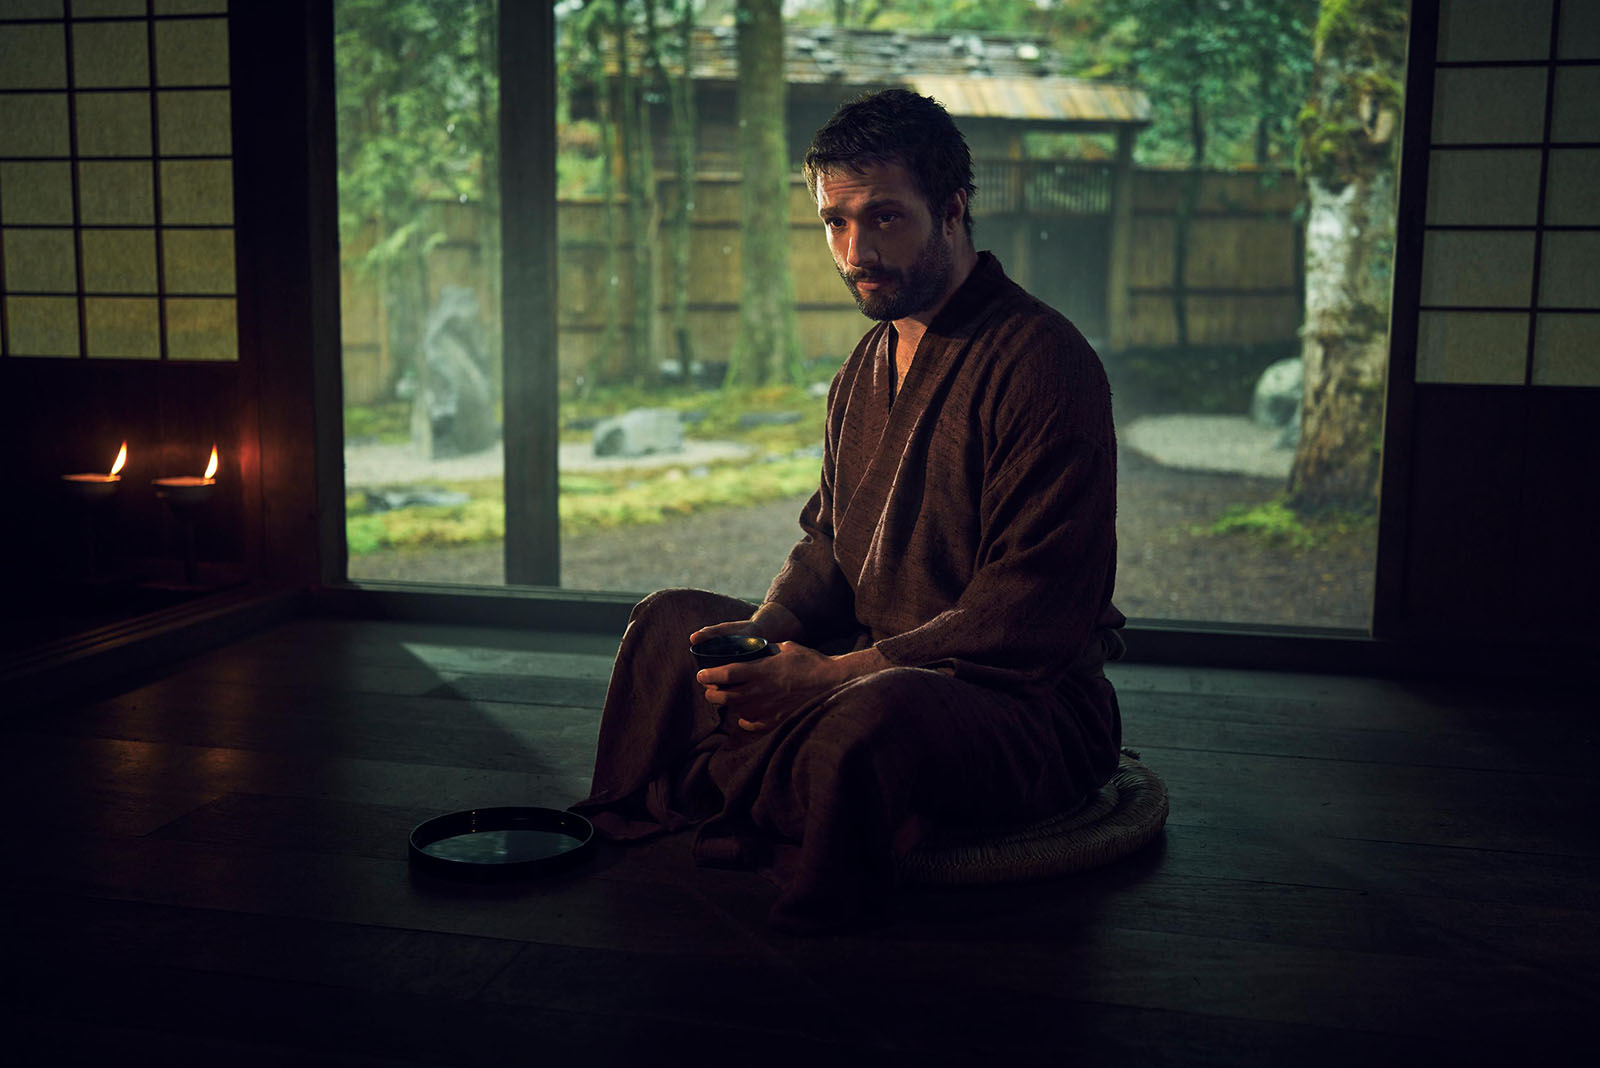 Shogun follows John Blackthorne, an English Protestant sailor who is imprisoned after his ship washes up on the shores of Japan. Image © FX